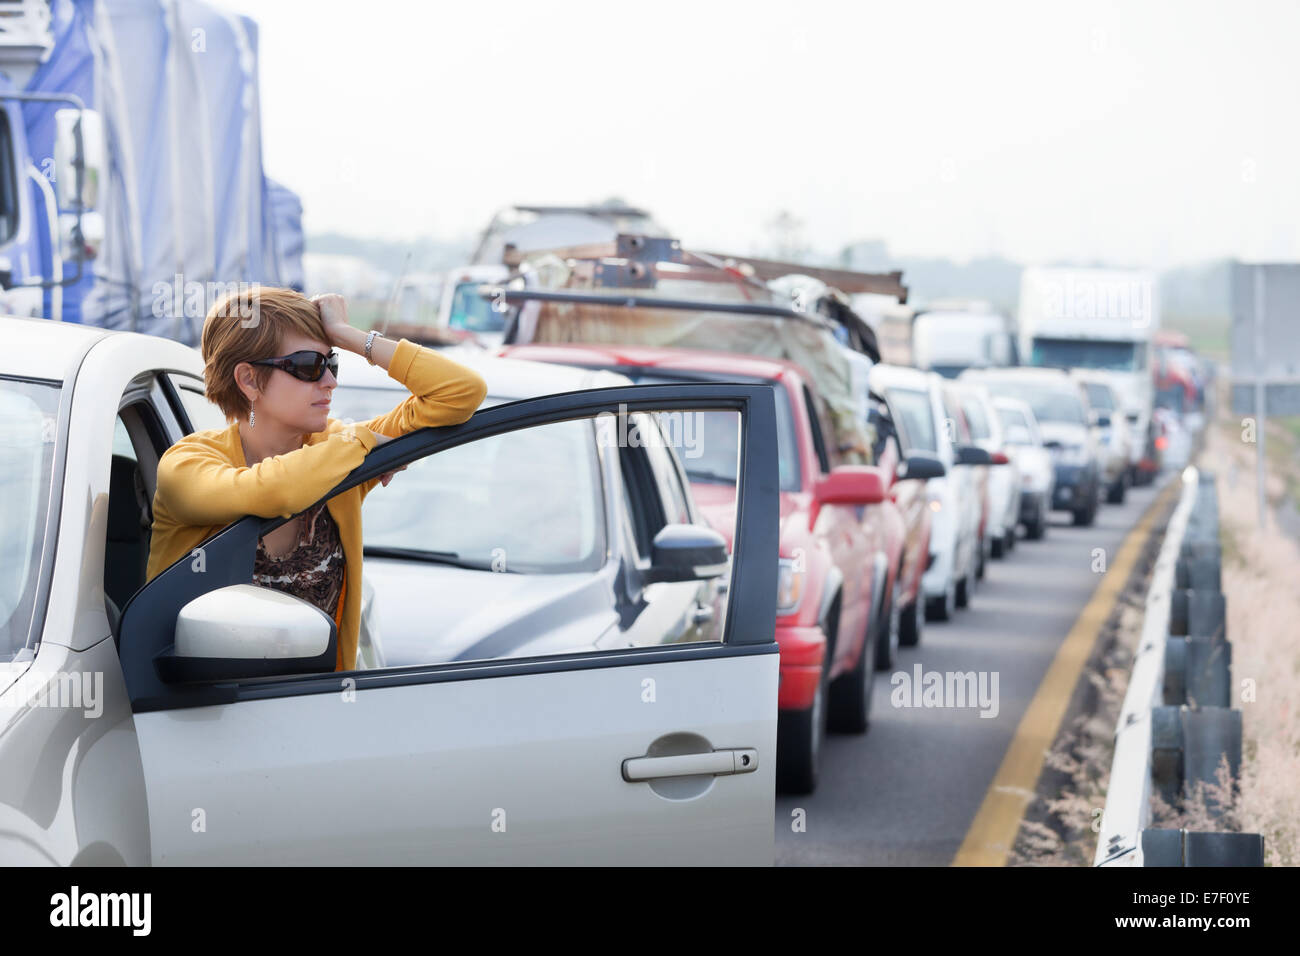 Frustrated middle aged Hispanic woman stuck in a traffic jam. Stock Photo